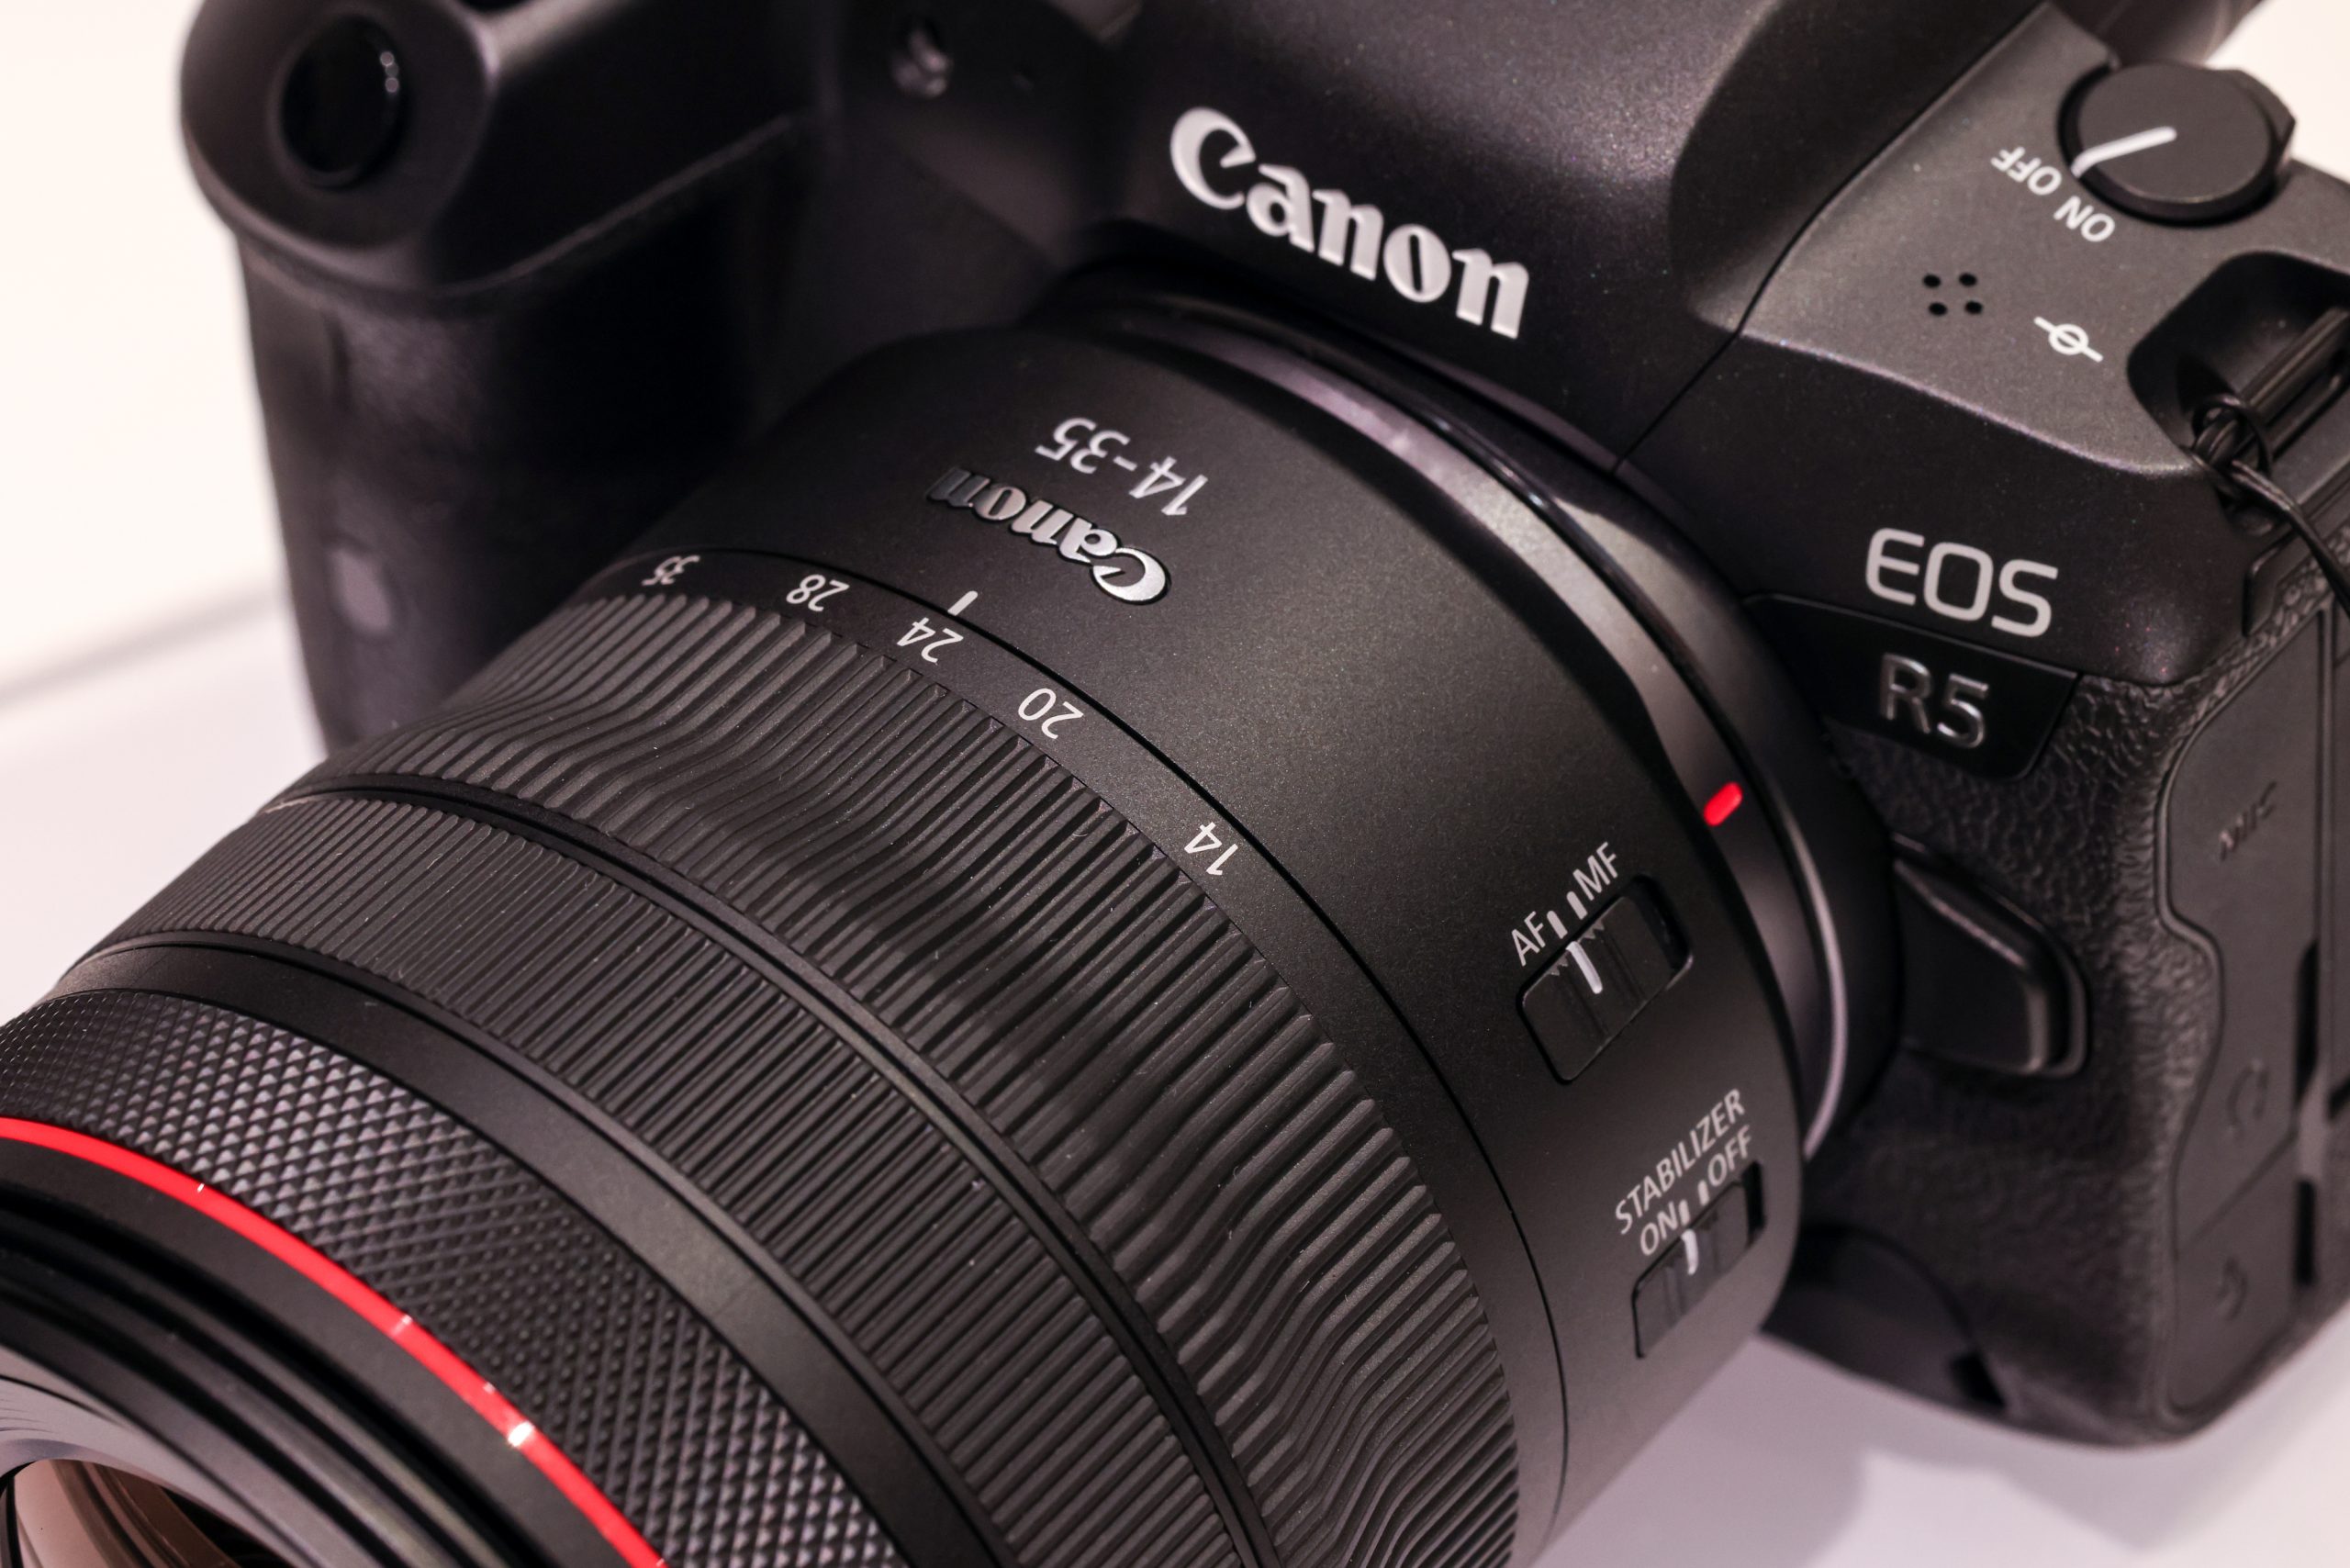 Canon】RF14-35mm F4 L IS USM 先行展示 体験レポート | THE MAP TIMES